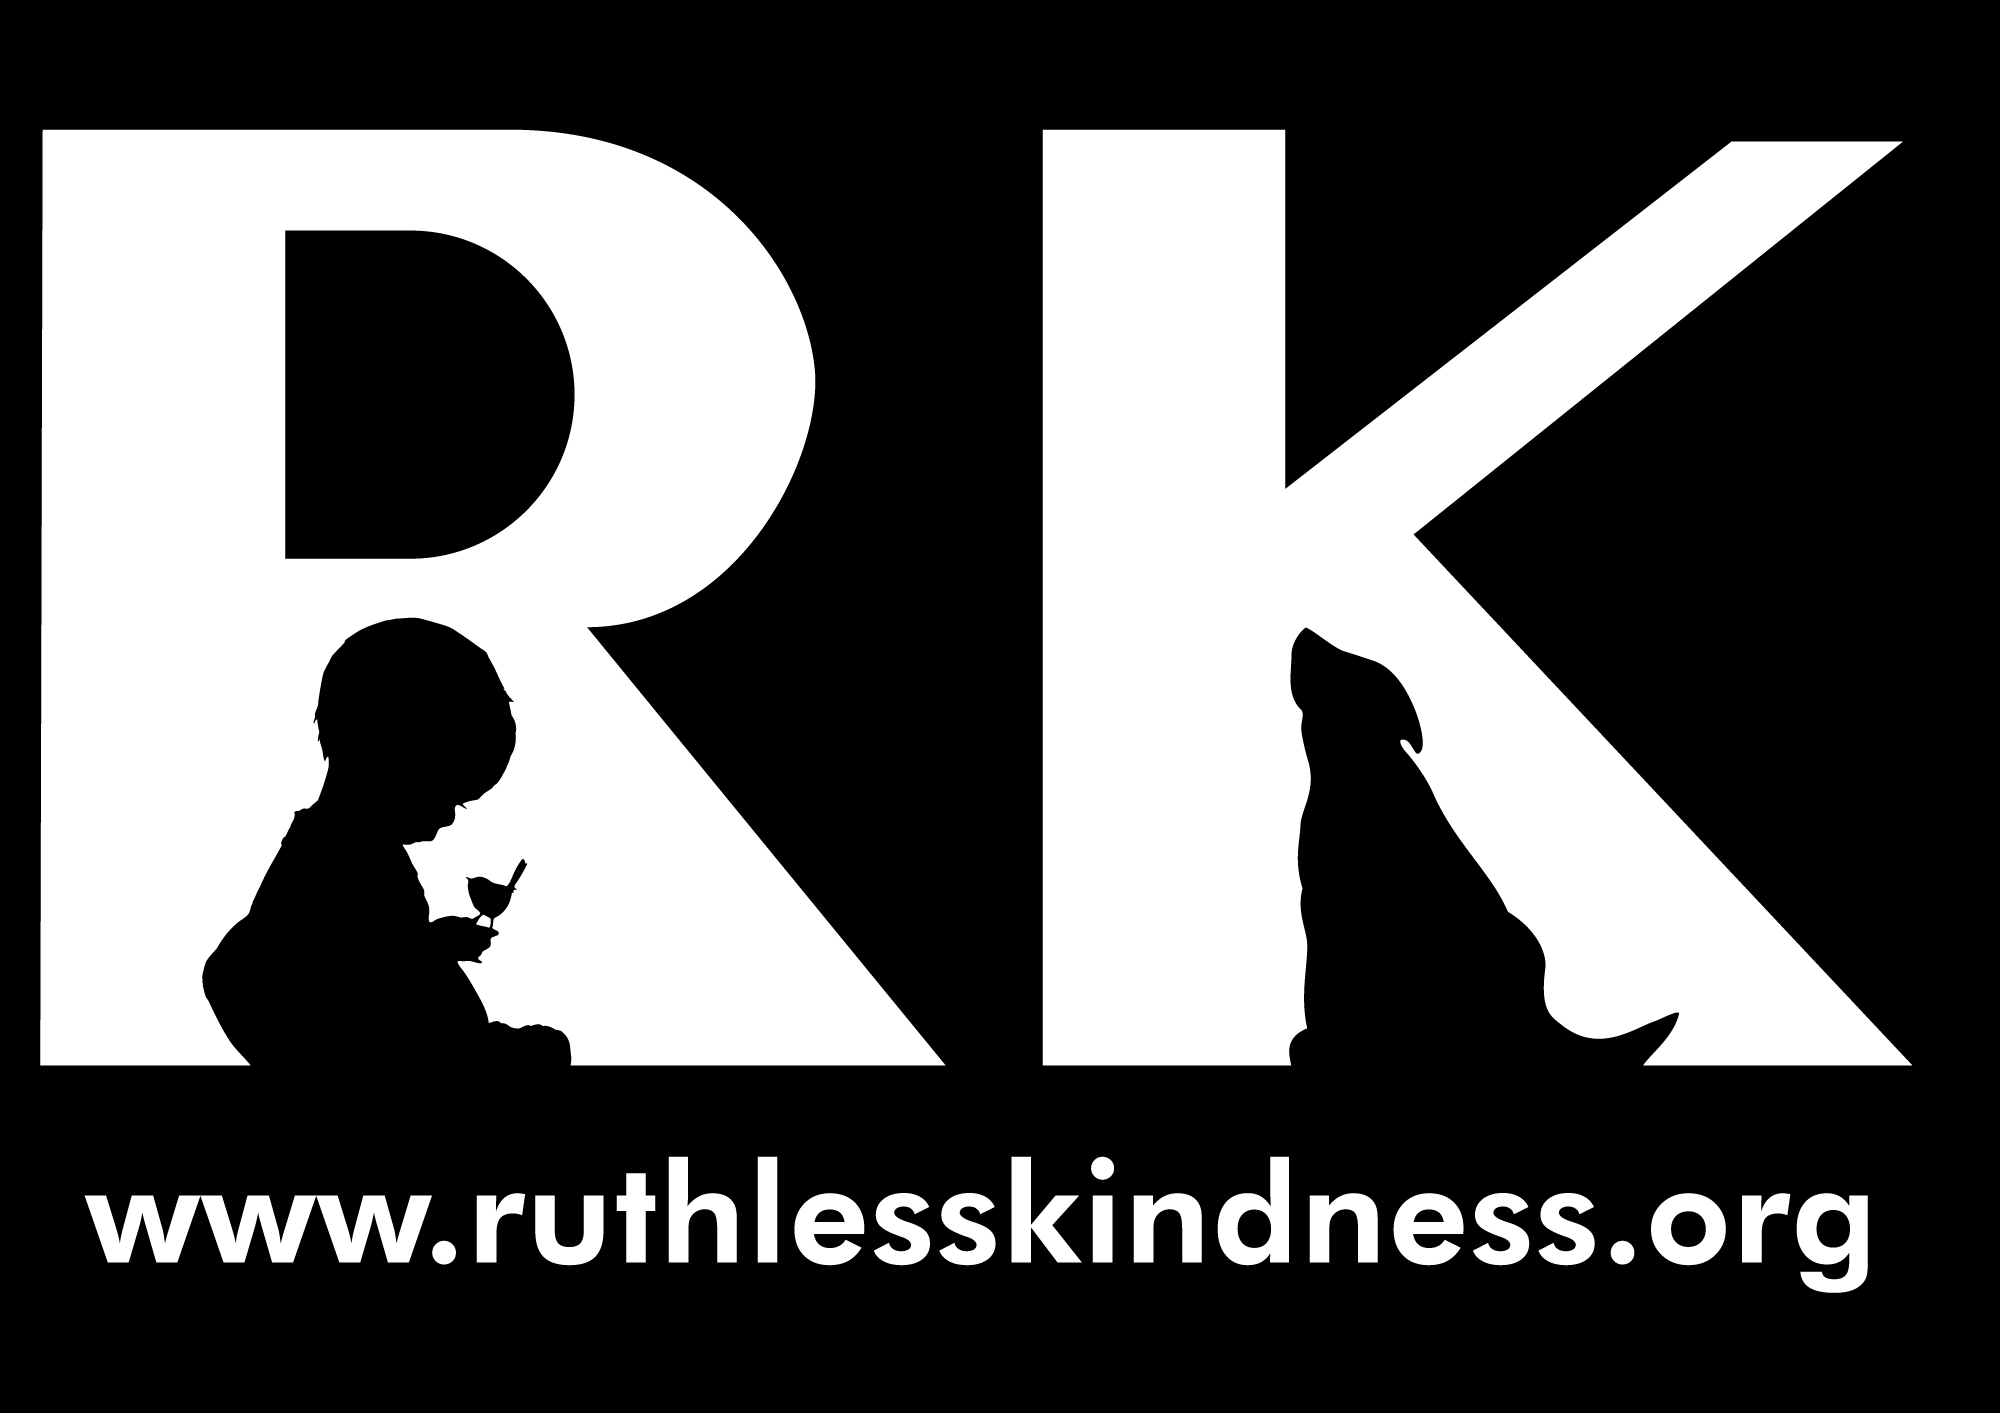 Ruthless Kindness logo features a silhouette of a child and dog on top of white R and K against a black background